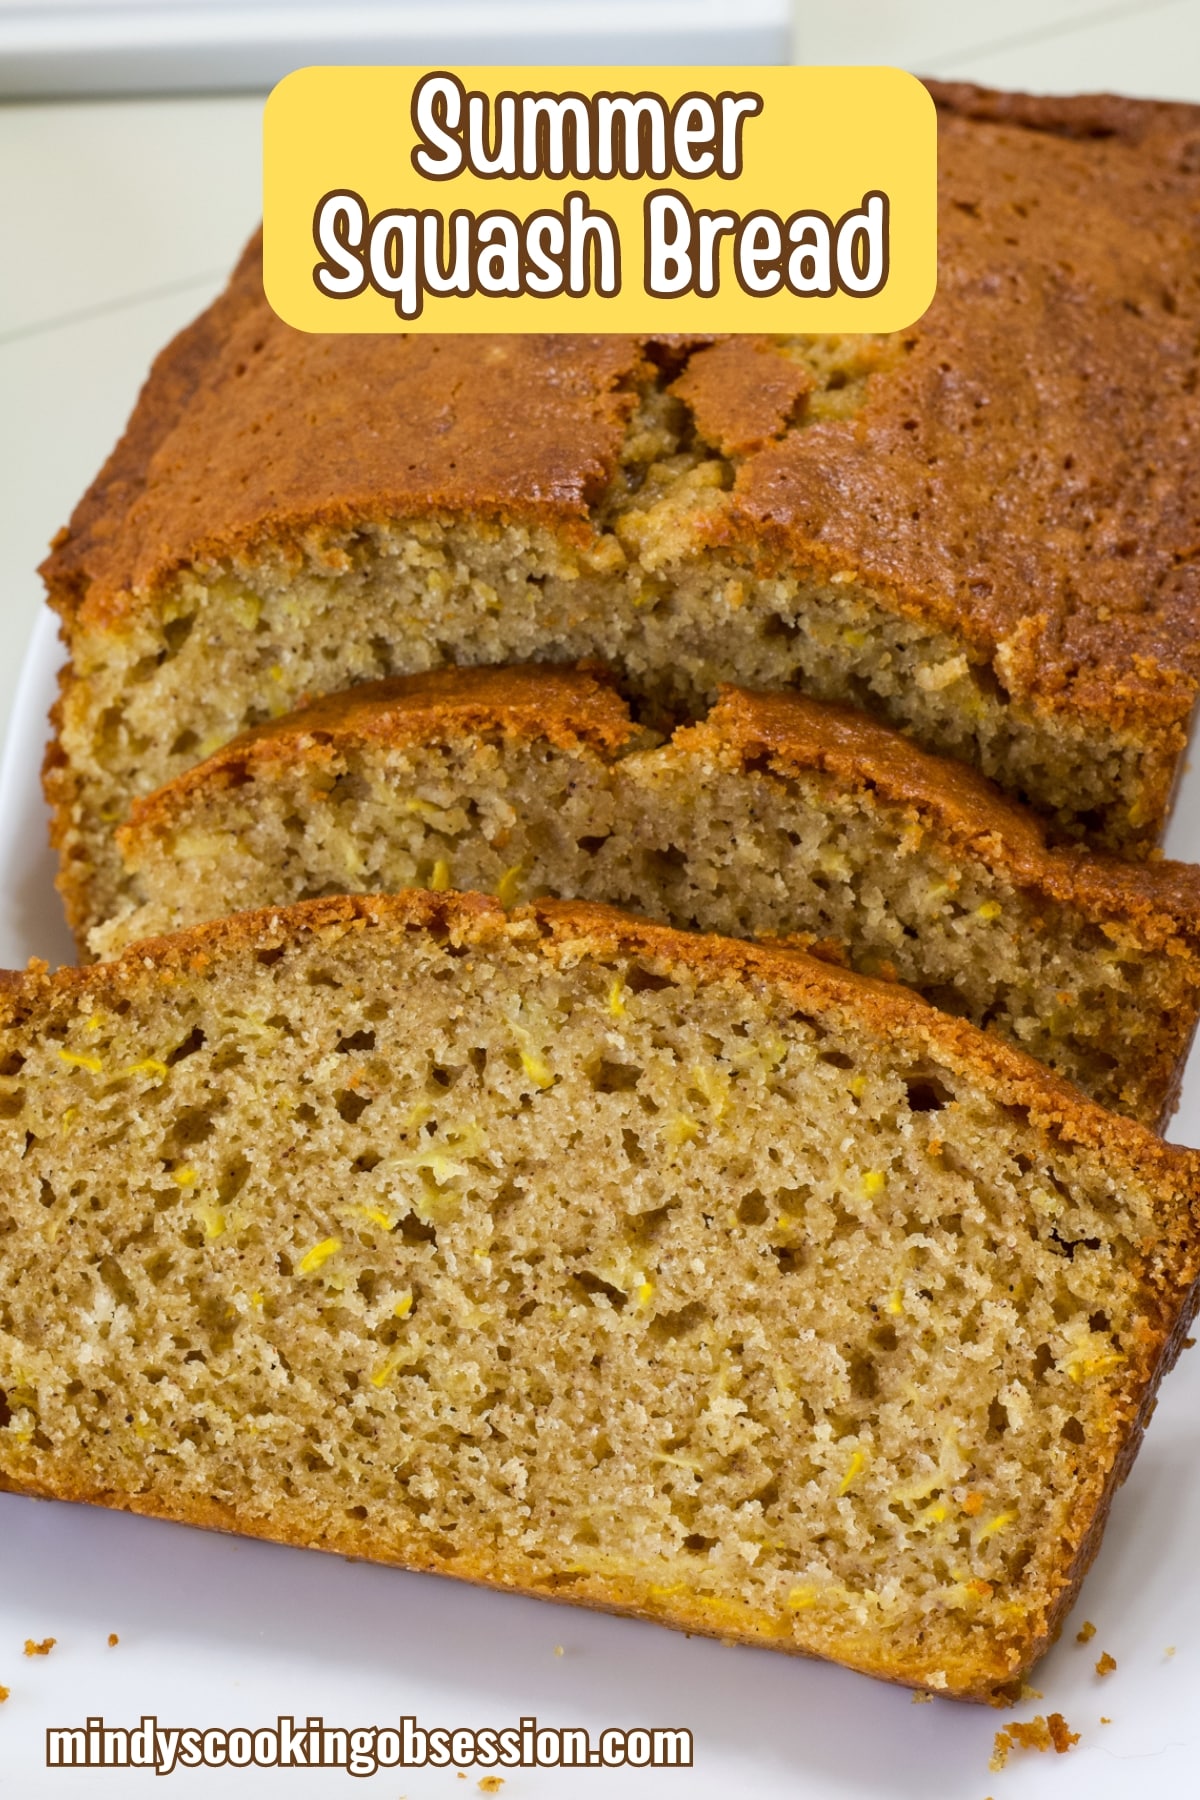 Discover a tasty twist on classic zucchini bread with this Yellow Summer Squash Bread recipe. It's a great way to use up that abundant summer squash! via @mindyscookingobsession